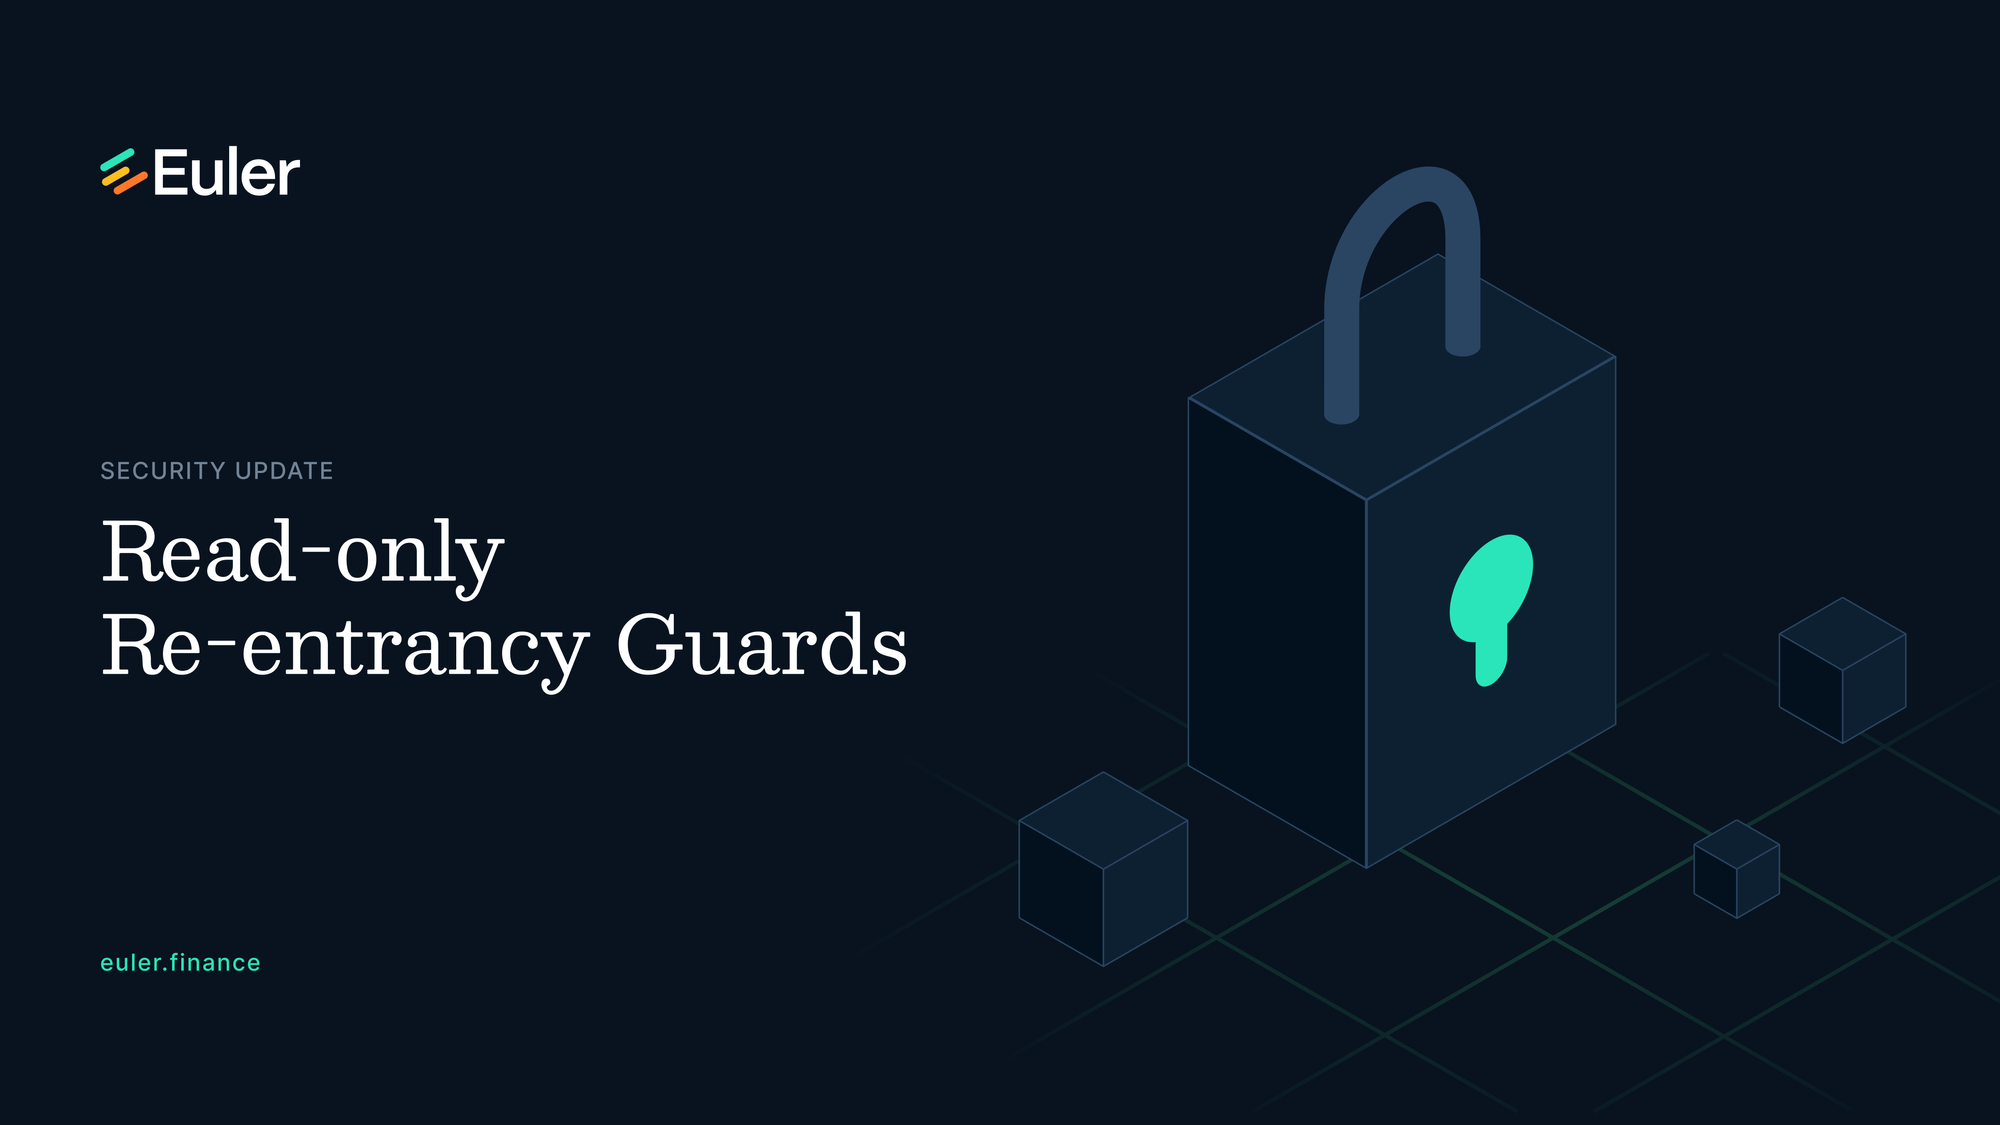 Read-only re-entrancy guards